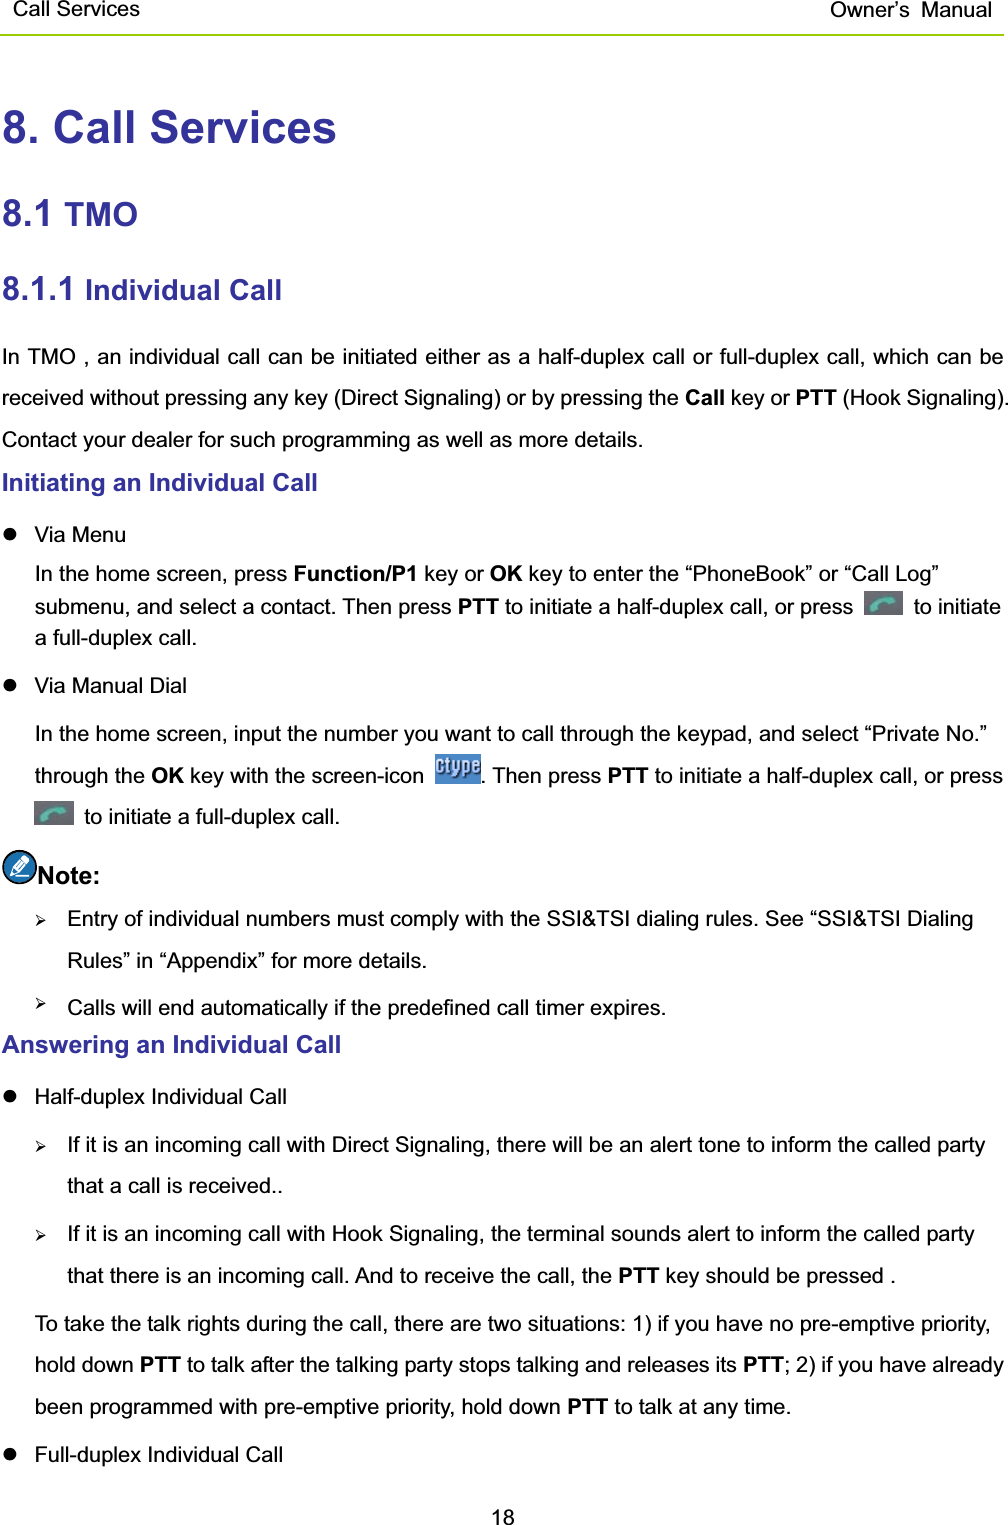 Call Services  Owner’s Manual188. Call Services 8.1 TMO8.1.1 Individual Call   In TMO , an individual call can be initiated either as a half-duplex call or full-duplex call, which can be received without pressing any key (Direct Signaling) or by pressing the Call key or PTT (Hook Signaling). Contact your dealer for such programming as well as more details.   Initiating an Individual Call   z Via Menu  In the home screen, press Function/P1 key or OK key to enter the “PhoneBook” or “Call Log” submenu, and select a contact. Then press PTT to initiate a half-duplex call, or press   to initiate a full-duplex call.   z  Via Manual Dial   In the home screen, input the number you want to call through the keypad, and select “Private No.” through the OK key with the screen-icon  . Then press PTT to initiate a half-duplex call, or press   to initiate a full-duplex call.   Note:¾Entry of individual numbers must comply with the SSI&amp;TSI dialing rules. See “SSI&amp;TSI Dialing Rules” in “Appendix” for more details.  ¾Calls will end automatically if the predefined call timer expires.  Answering an Individual Call   z  Half-duplex Individual Call   ¾If it is an incoming call with Direct Signaling, there will be an alert tone to inform the called party that a call is received..   ¾If it is an incoming call with Hook Signaling, the terminal sounds alert to inform the called party that there is an incoming call. And to receive the call, the PTT key should be pressed .   To take the talk rights during the call, there are two situations: 1) if you have no pre-emptive priority, hold down PTT to talk after the talking party stops talking and releases its PTT; 2) if you have already been programmed with pre-emptive priority, hold down PTT to talk at any time.   z  Full-duplex Individual Call   